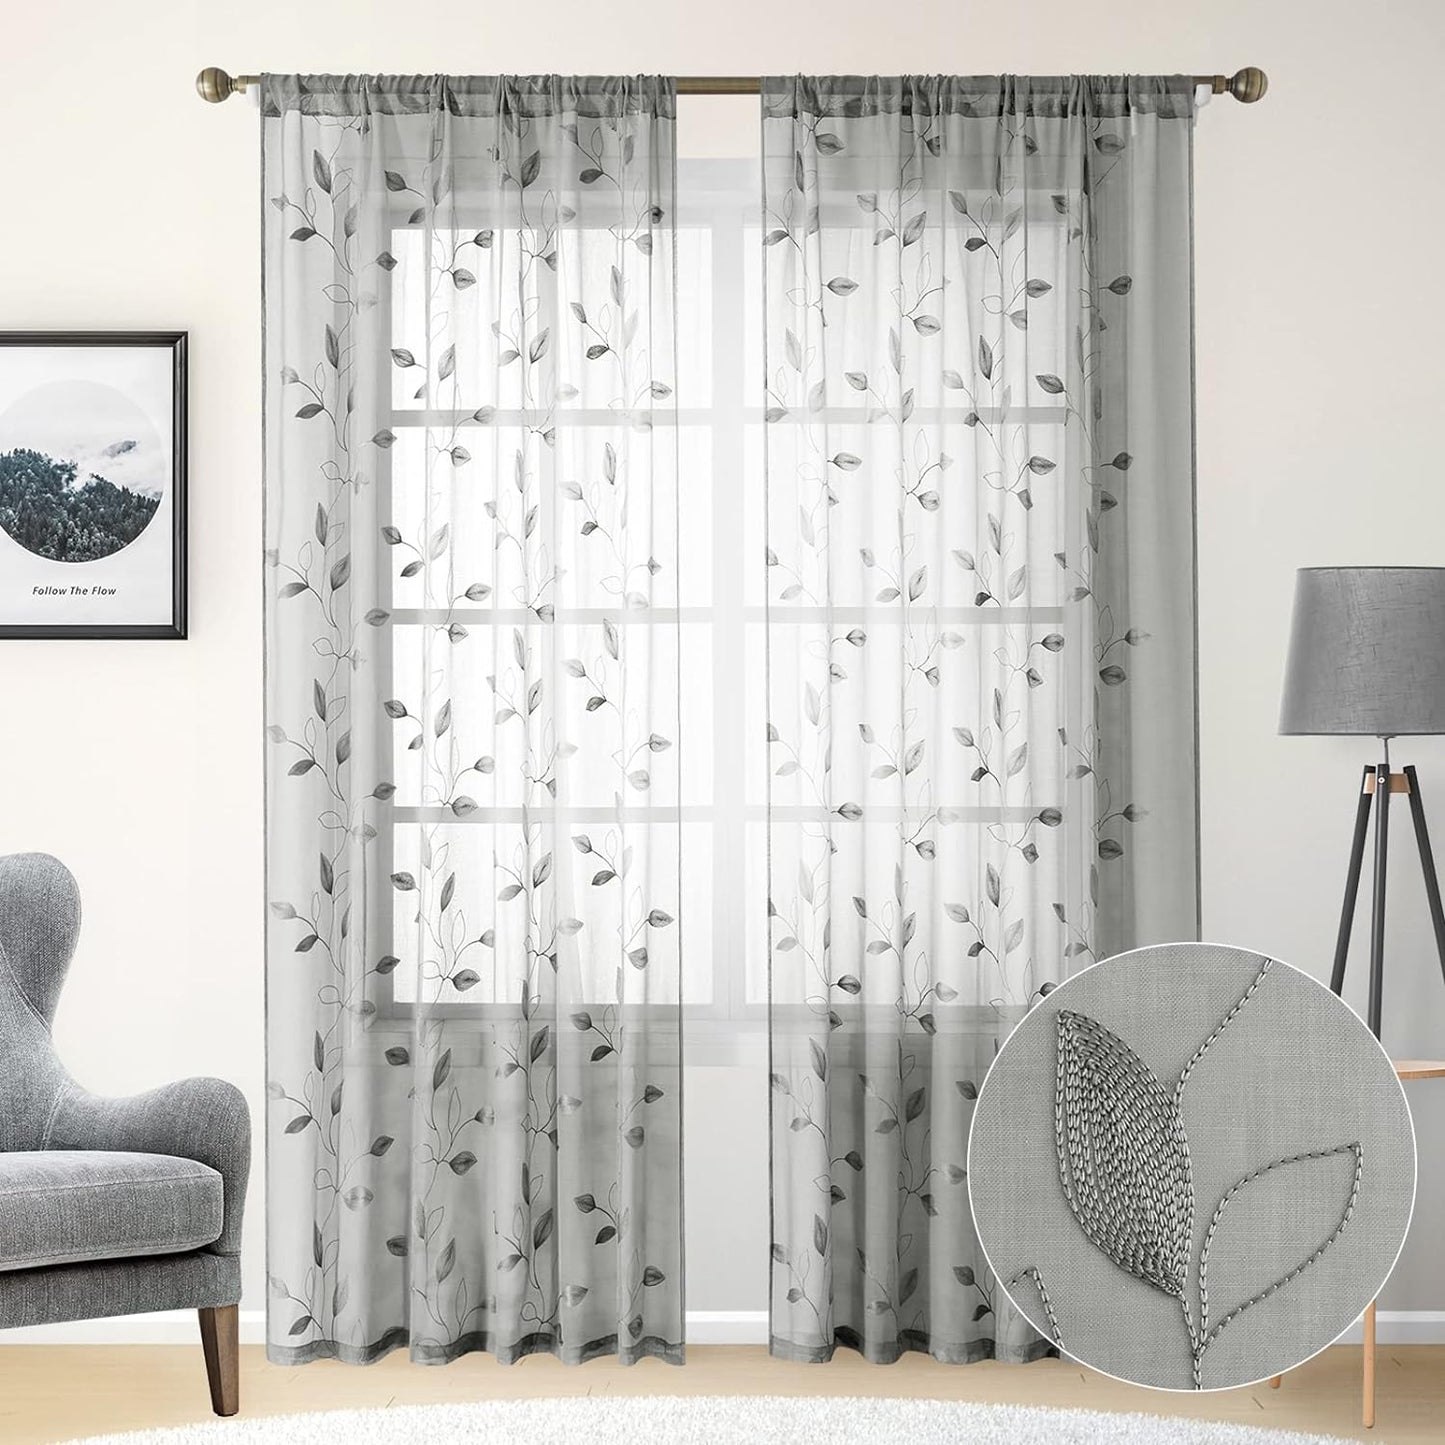 HOMEIDEAS Sage Green Sheer Curtains 52 X 63 Inches Length 2 Panels Embroidered Leaf Pattern Pocket Faux Linen Floral Semi Sheer Voile Window Curtains/Drapes for Bedroom Living Room  HOMEIDEAS 3-Grey W52" X L96" 